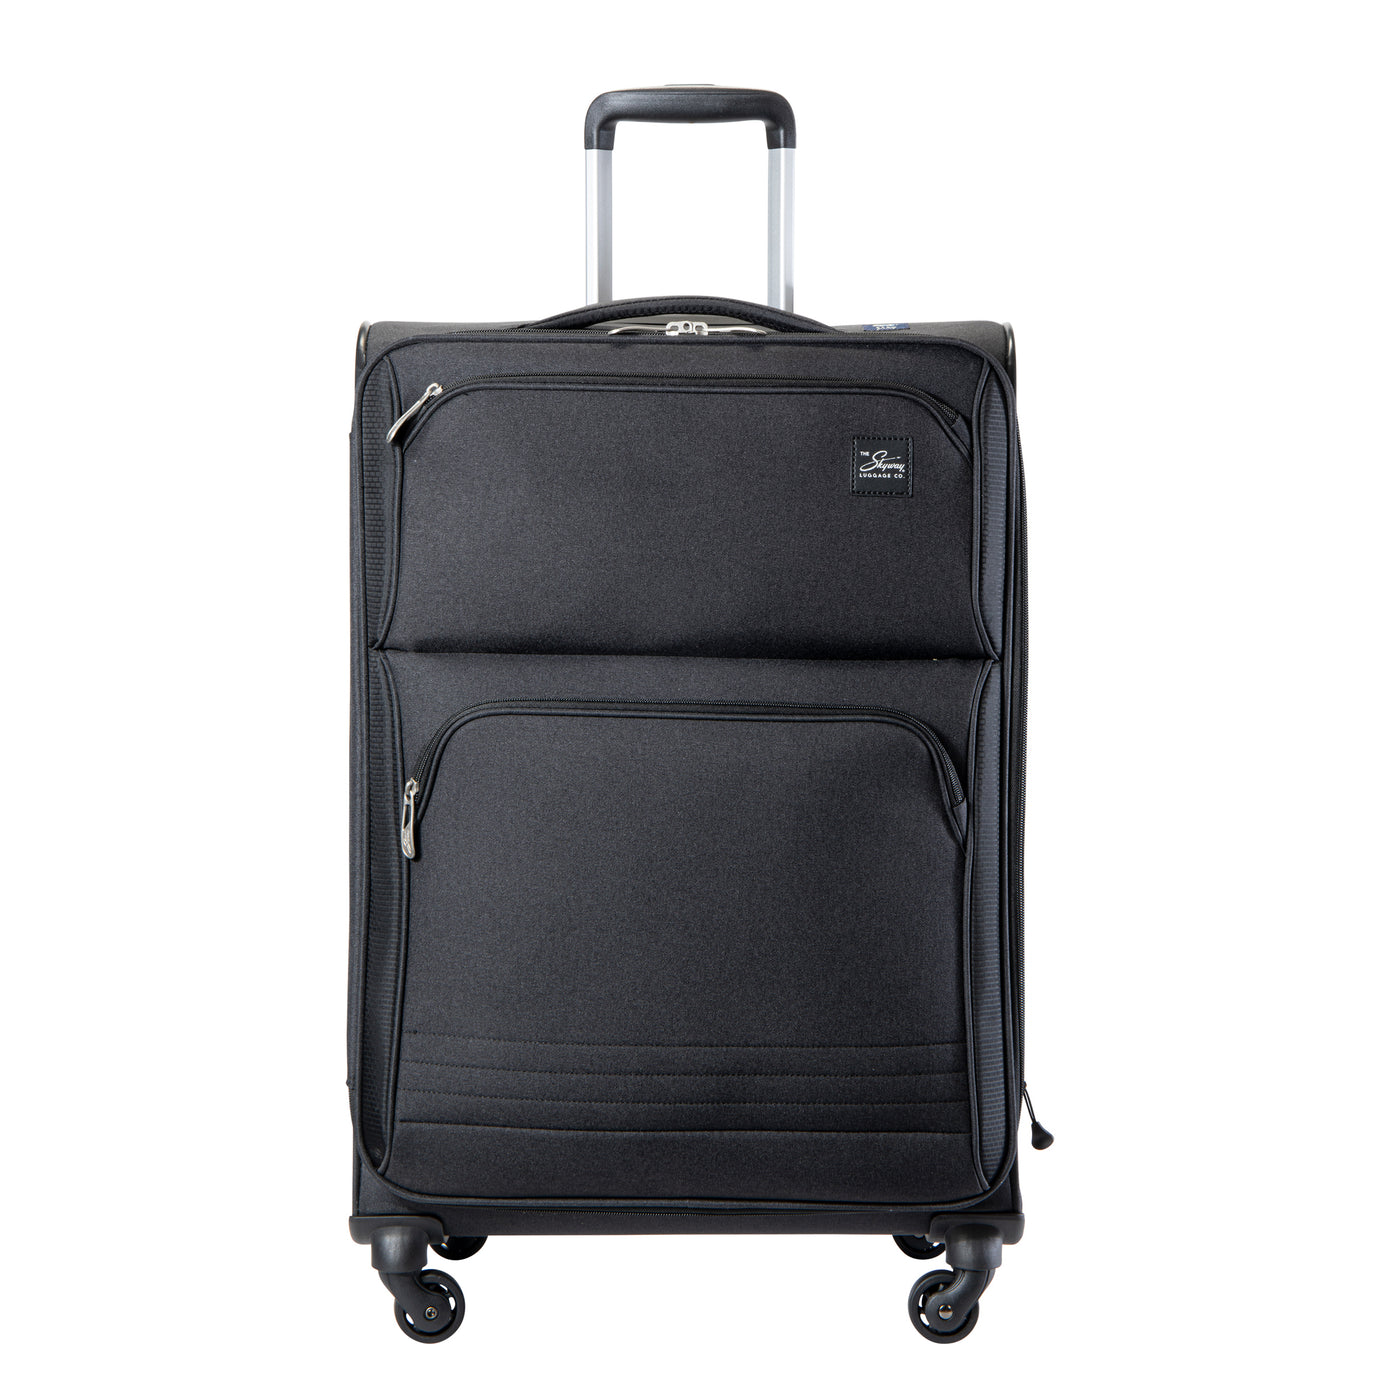 Hobart Bay 2 Piece Set - Carry-On and Medium Check-In